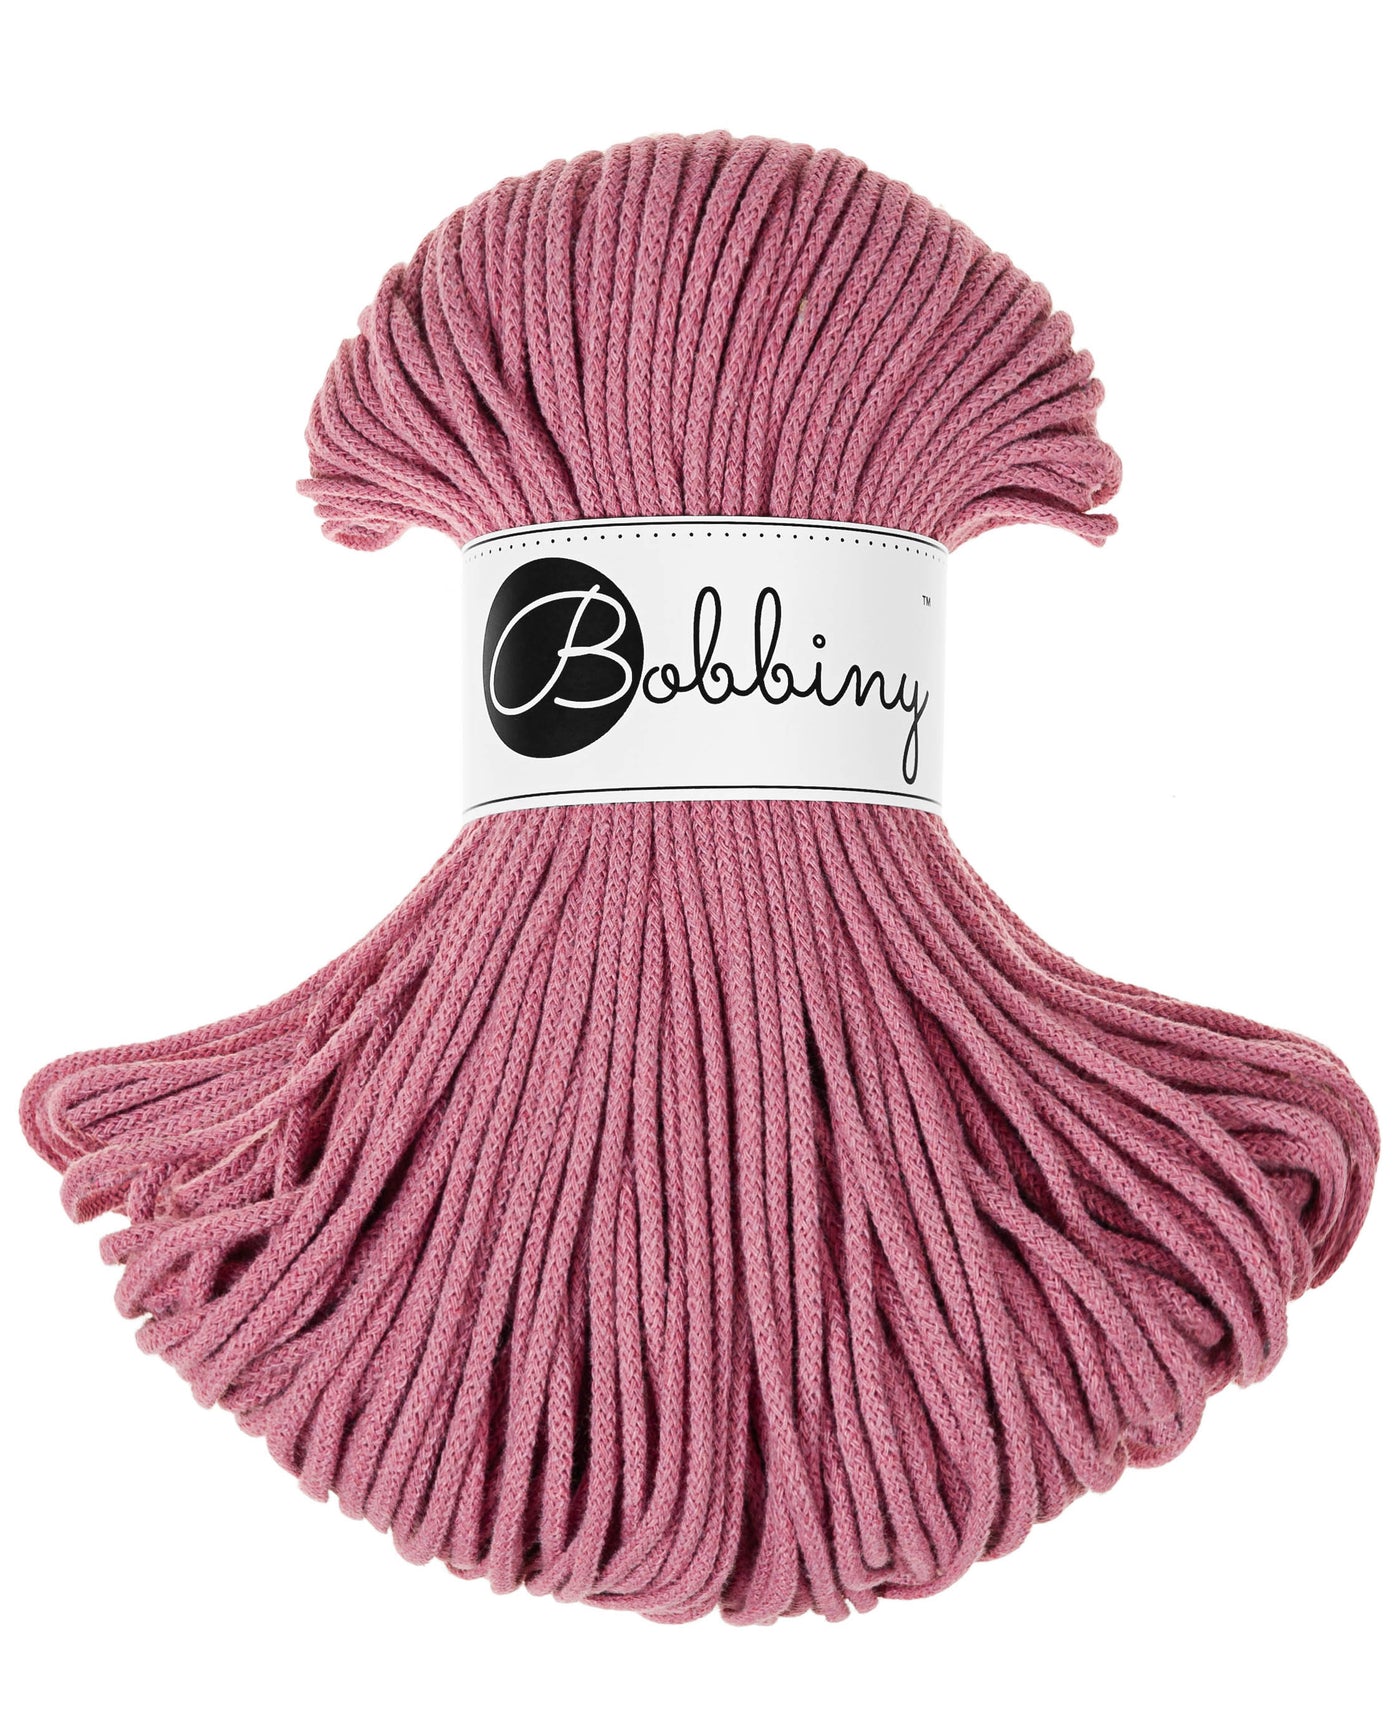 These beautiful Bobbiny cords are made in Poland from 100% recycled cottons and are non-toxic, certified safe for children and meet certified worldwide textile standards.  3mm Diameter  100 metres Length  Recommended for use with 8-10mm crochet or knitting needles  Cotton inner and outer layers